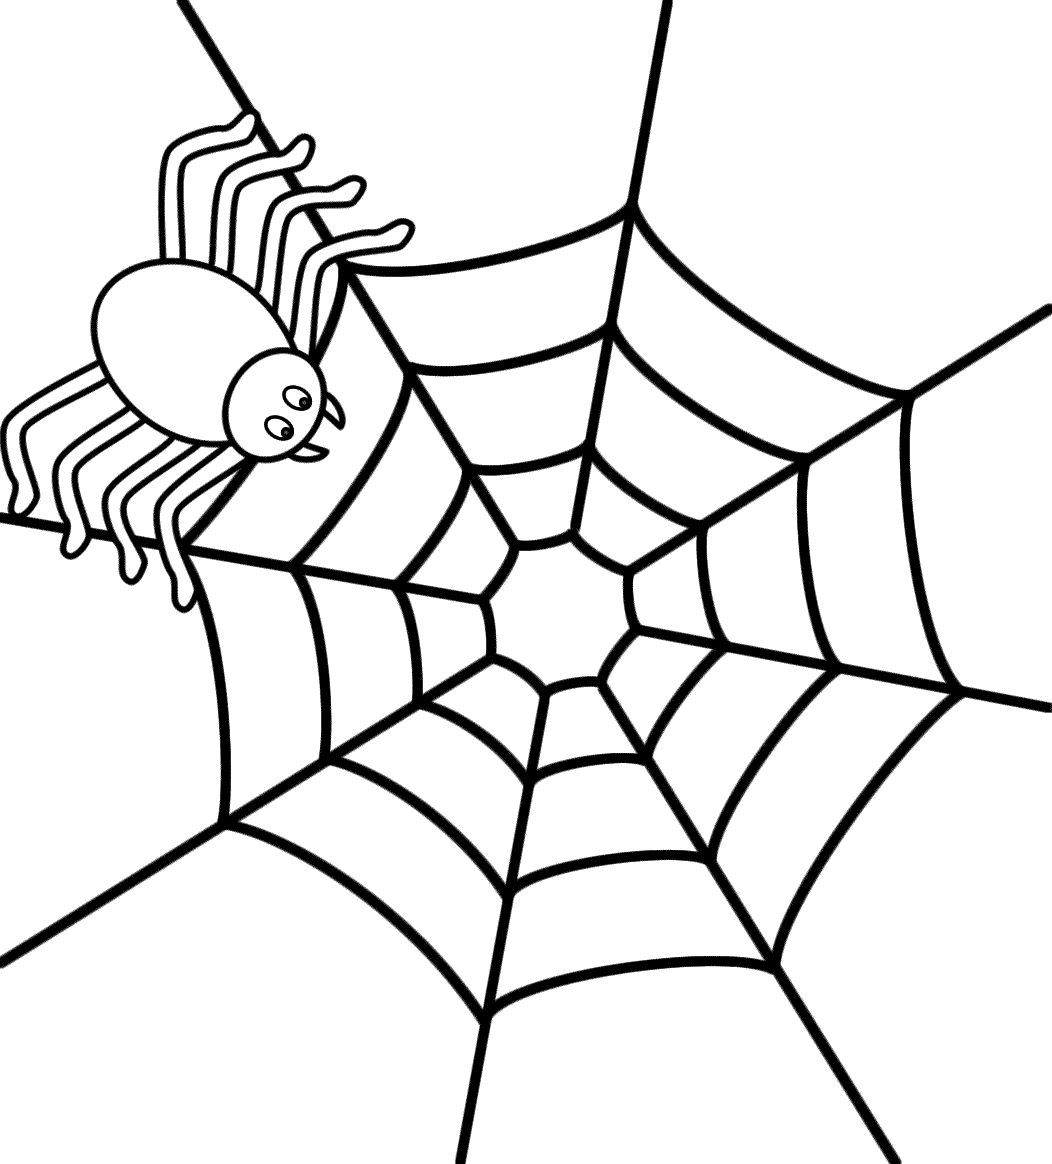 spider web coloring pages for kids | Only Coloring Pages